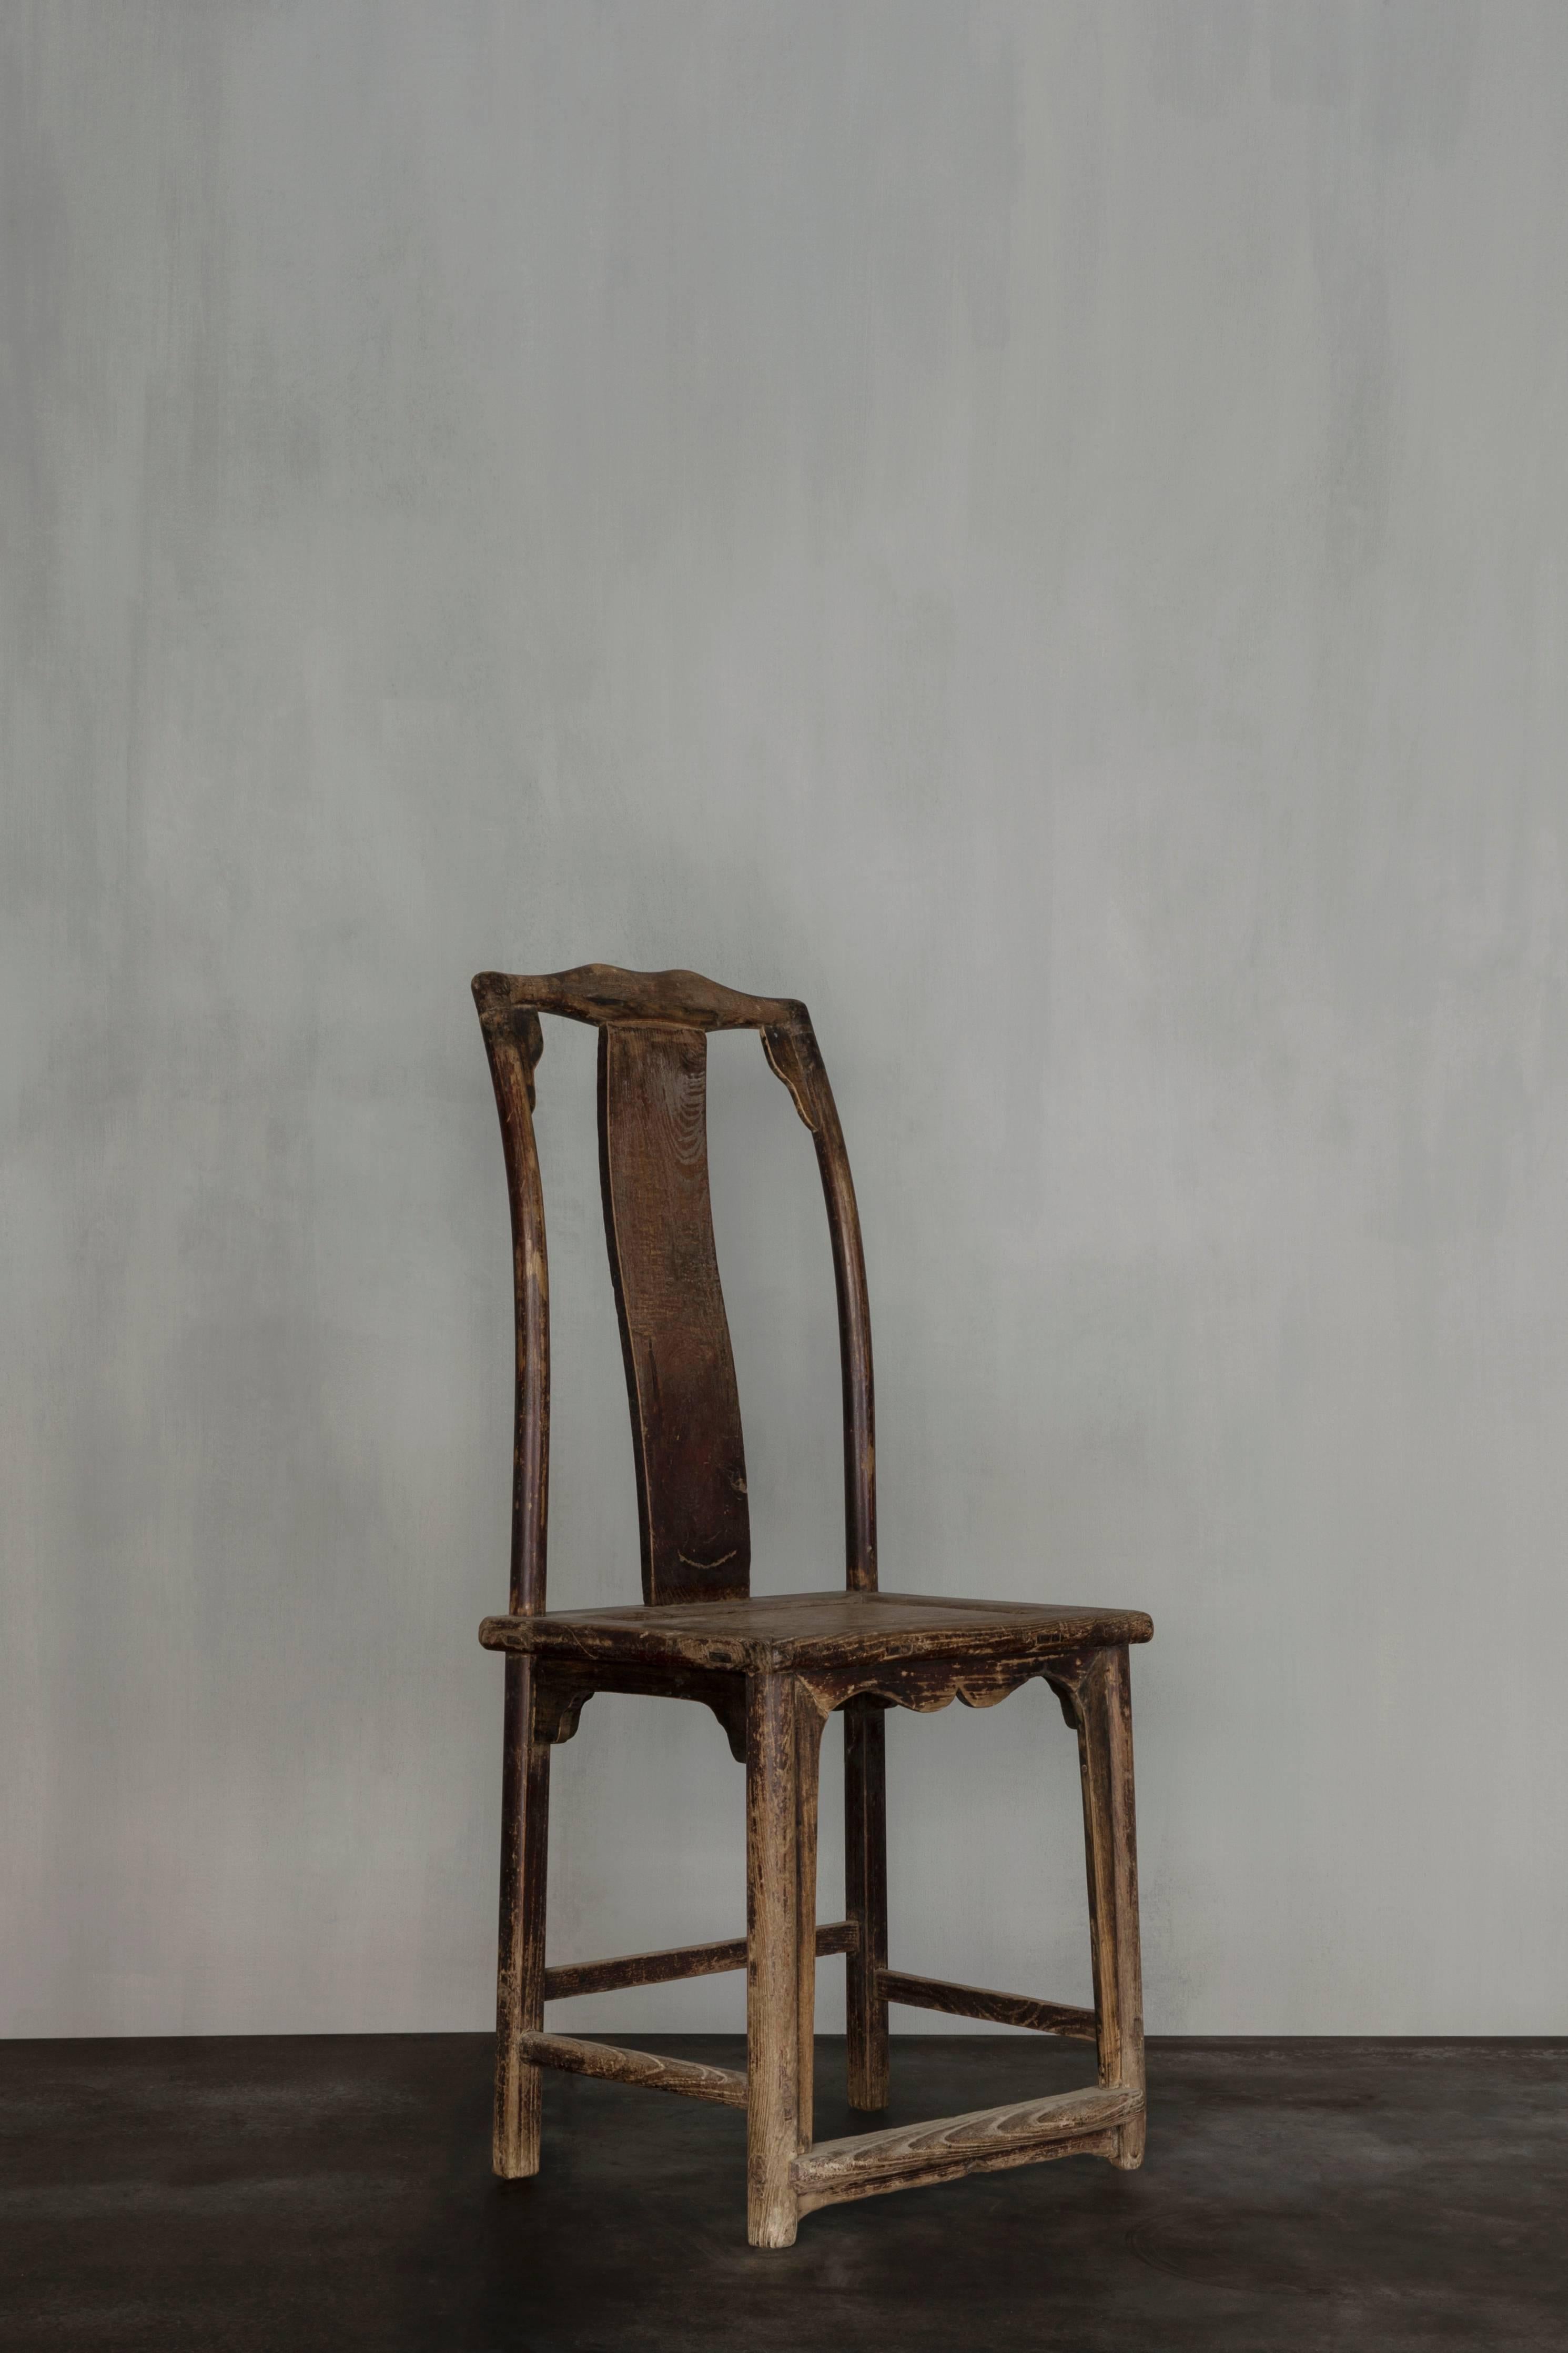 Beautiful old Chinese oak chair from the 19th century.
Please note - this item is located in our New York City Studio and will be shipped from there.